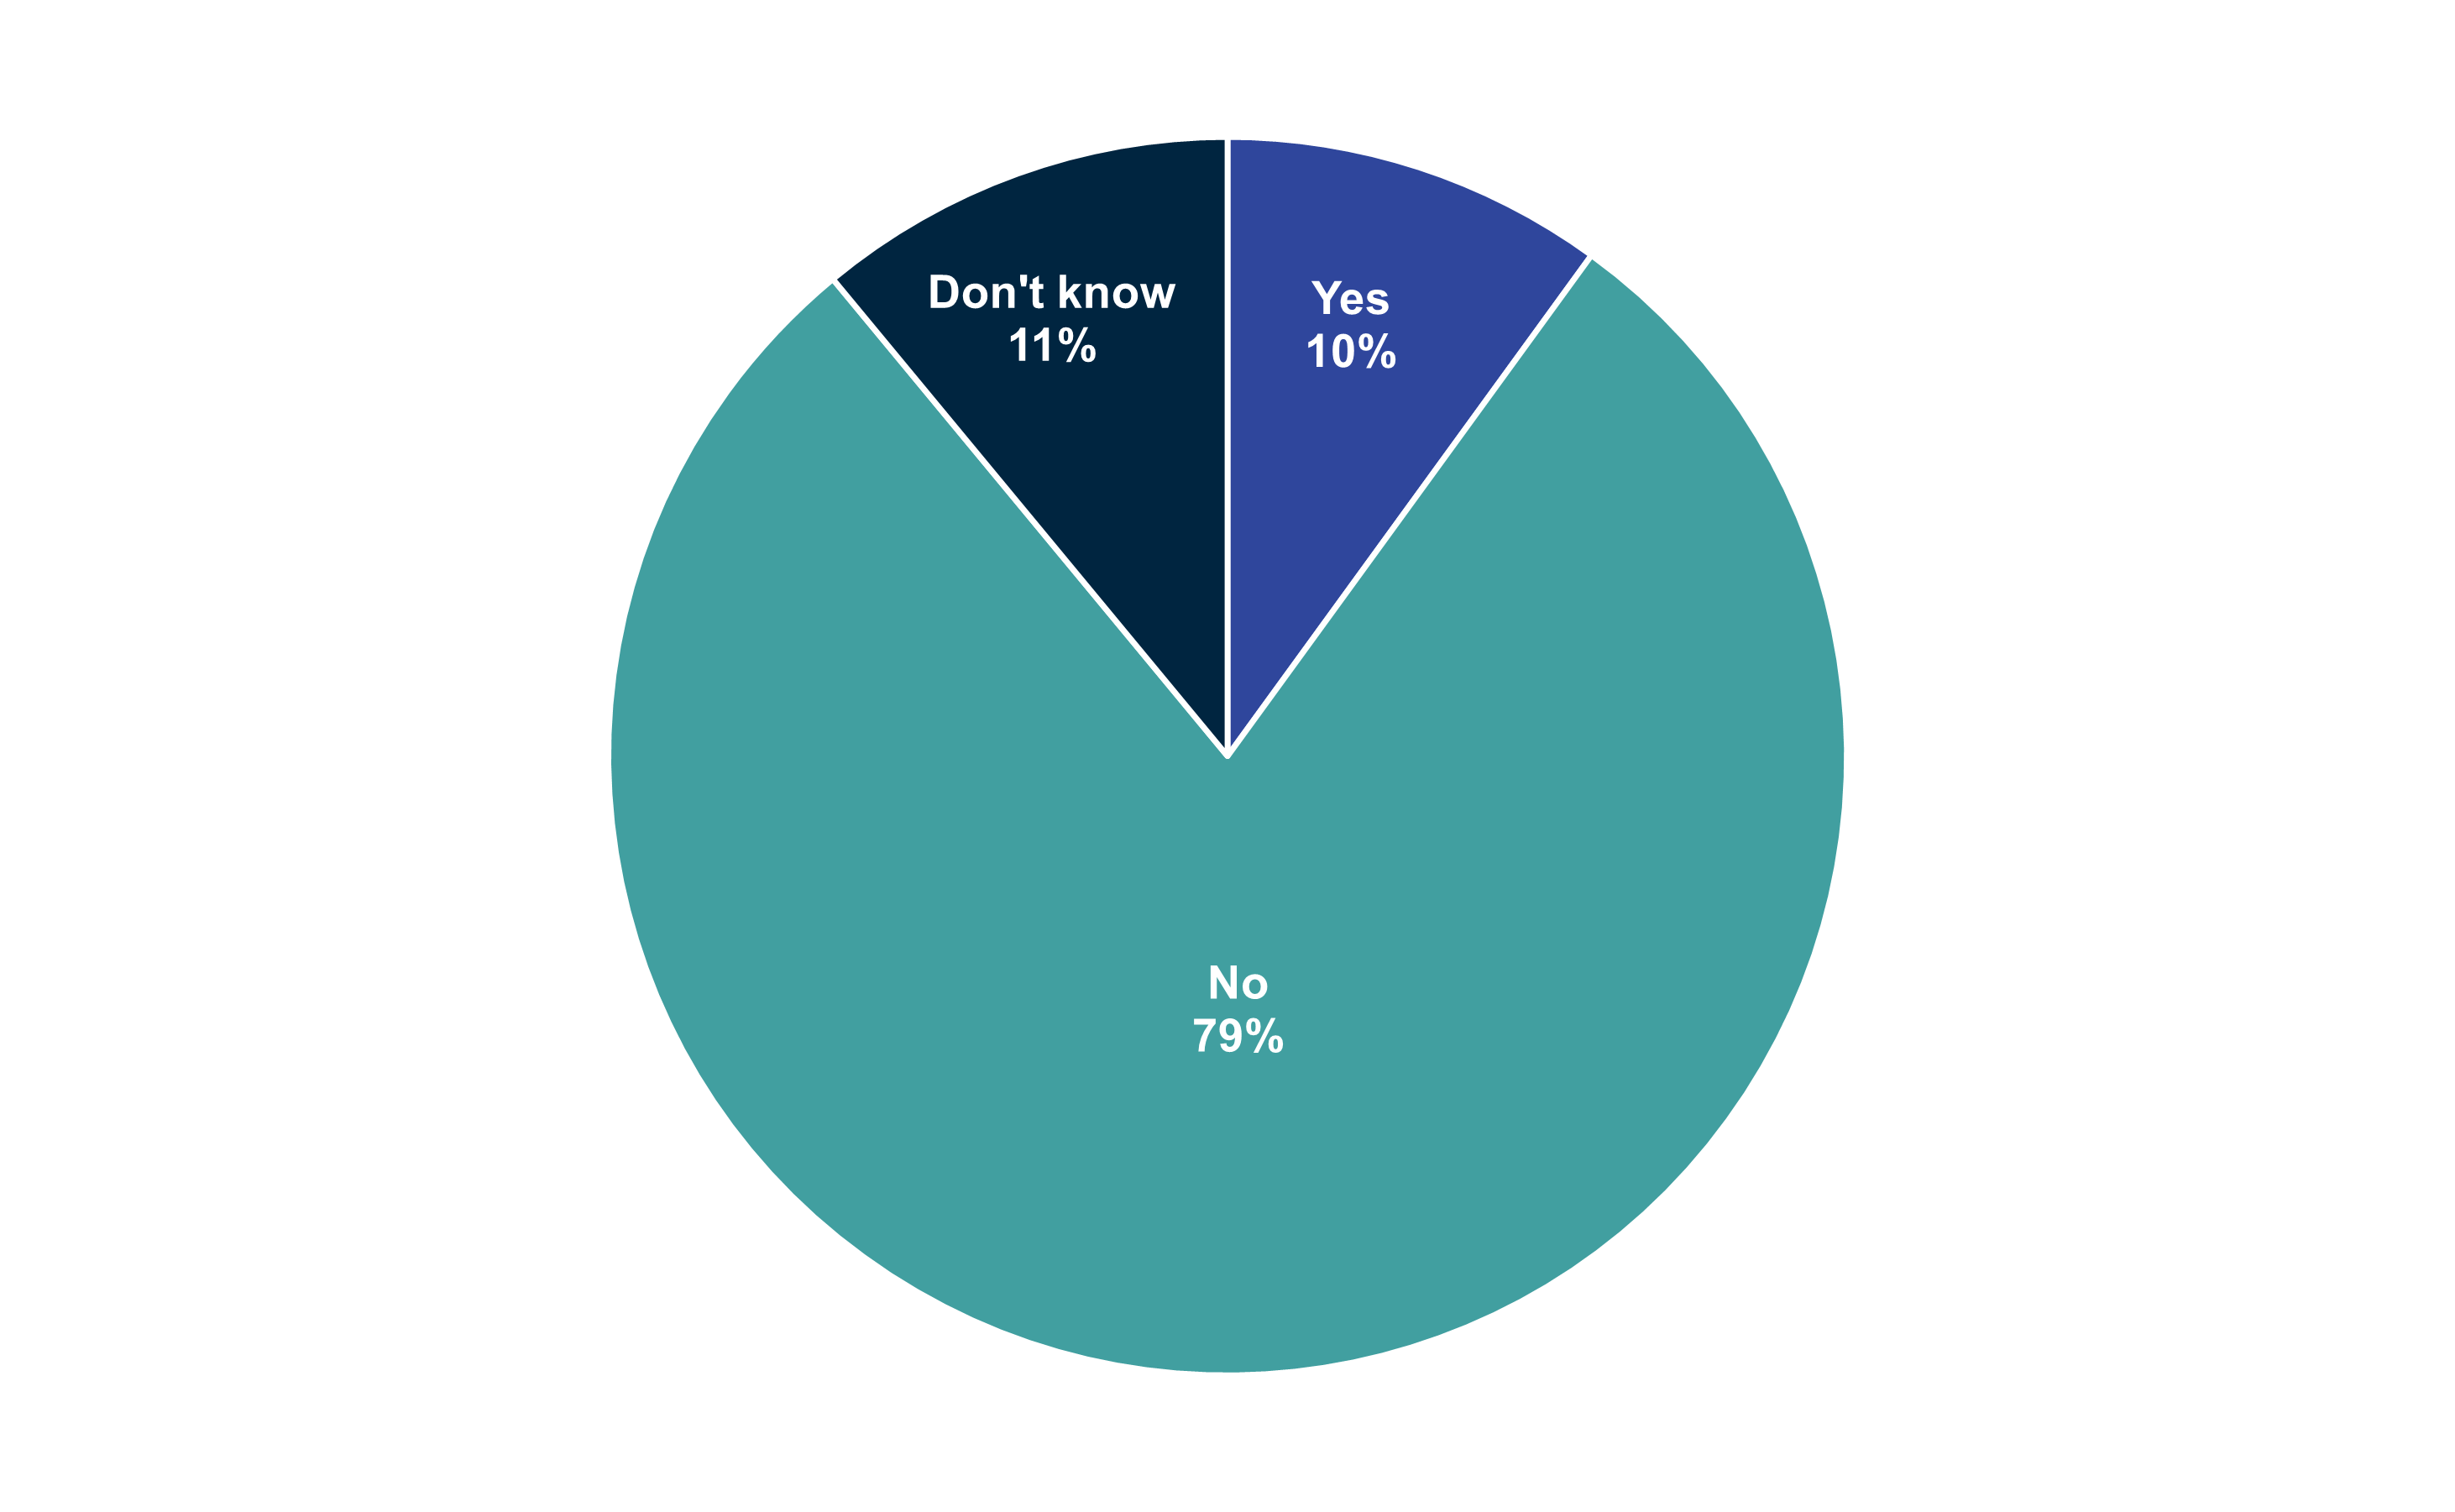 A pie chart showing if young people had played machines in an adults-only area. Options were 'Yes', 'No' or 'Don't know'. Data from the chart is provided within the following table